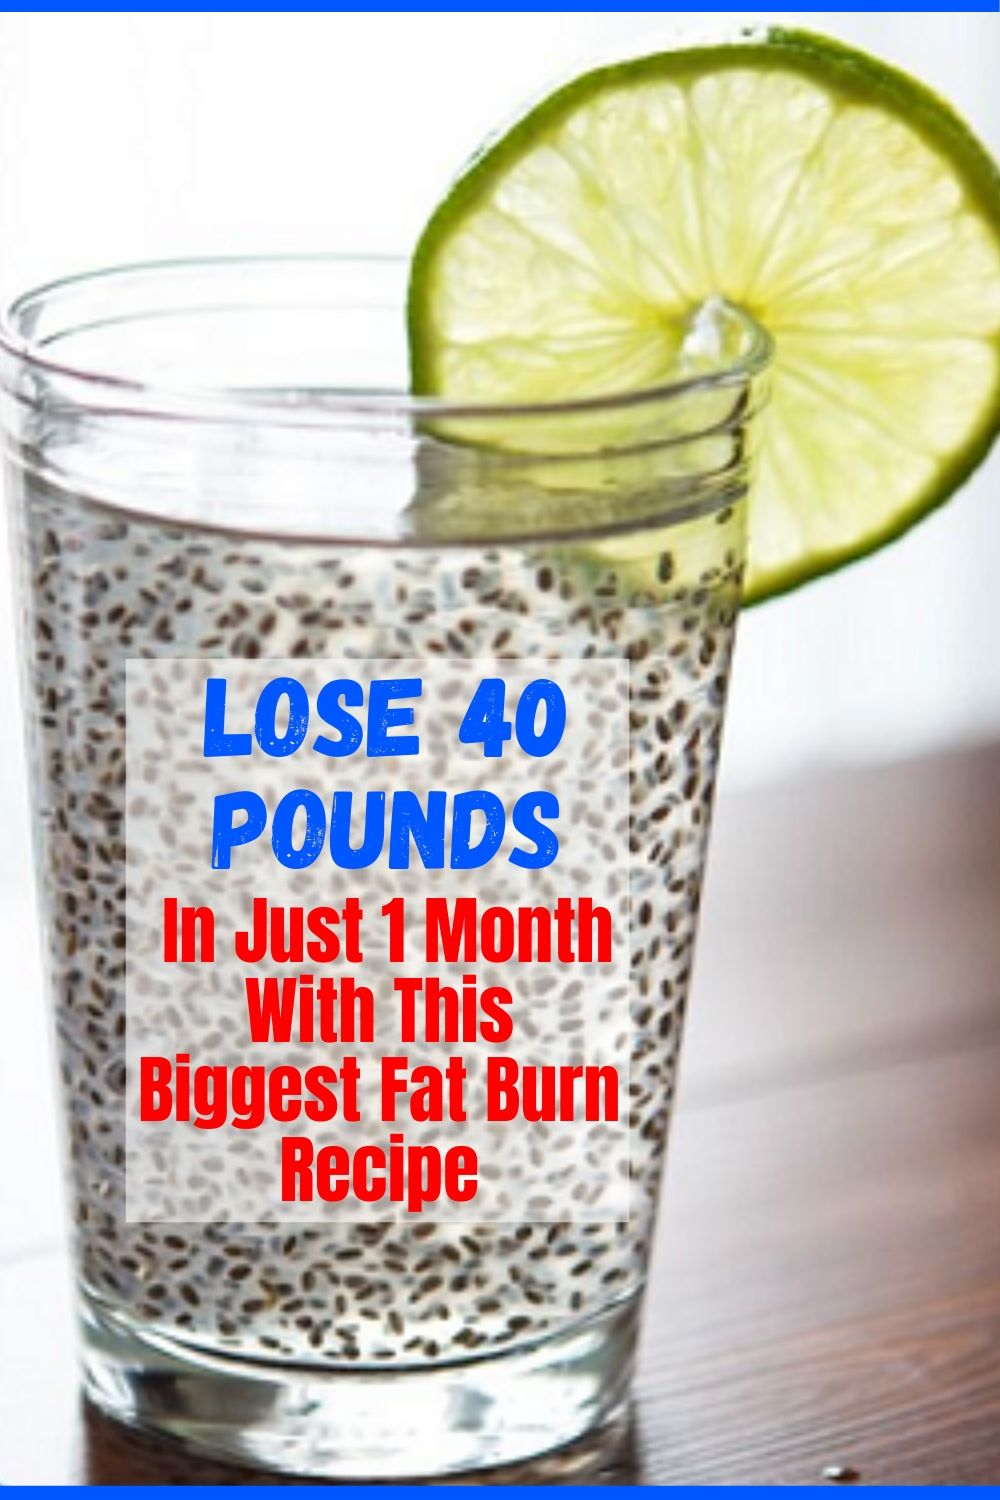 Lose 40 Pounds In Just 1 Month With This Biggest Fat Burn Recipe! – HERTHEO